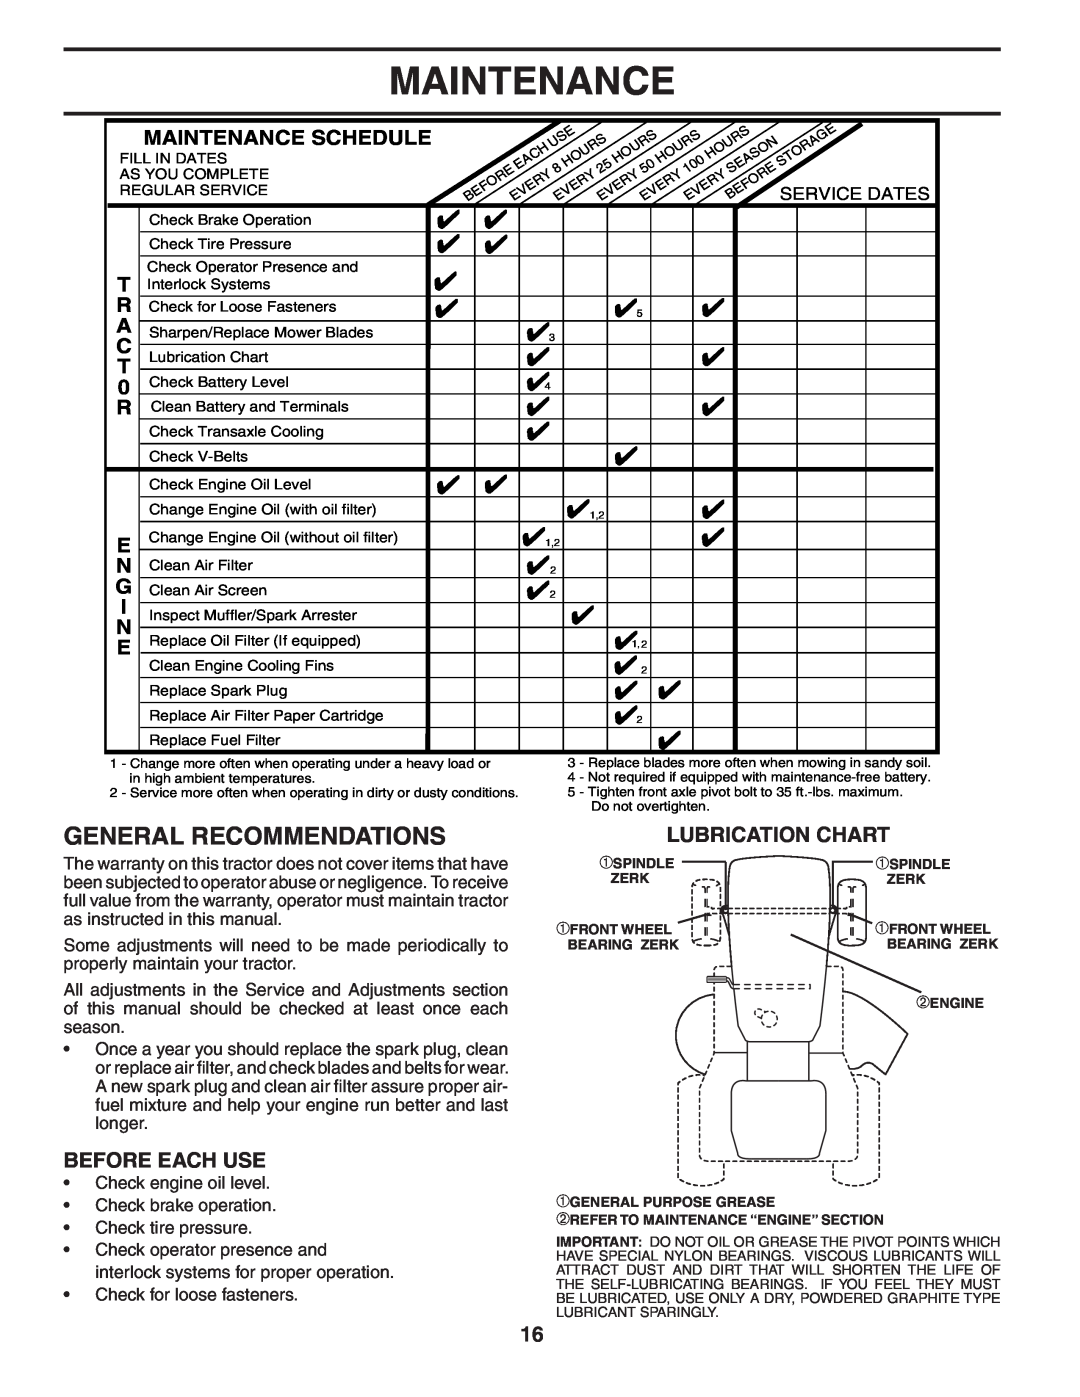 Poulan 184581 owner manual Maintenance, General Recommendations, Lubrication Chart, Before Each Use 